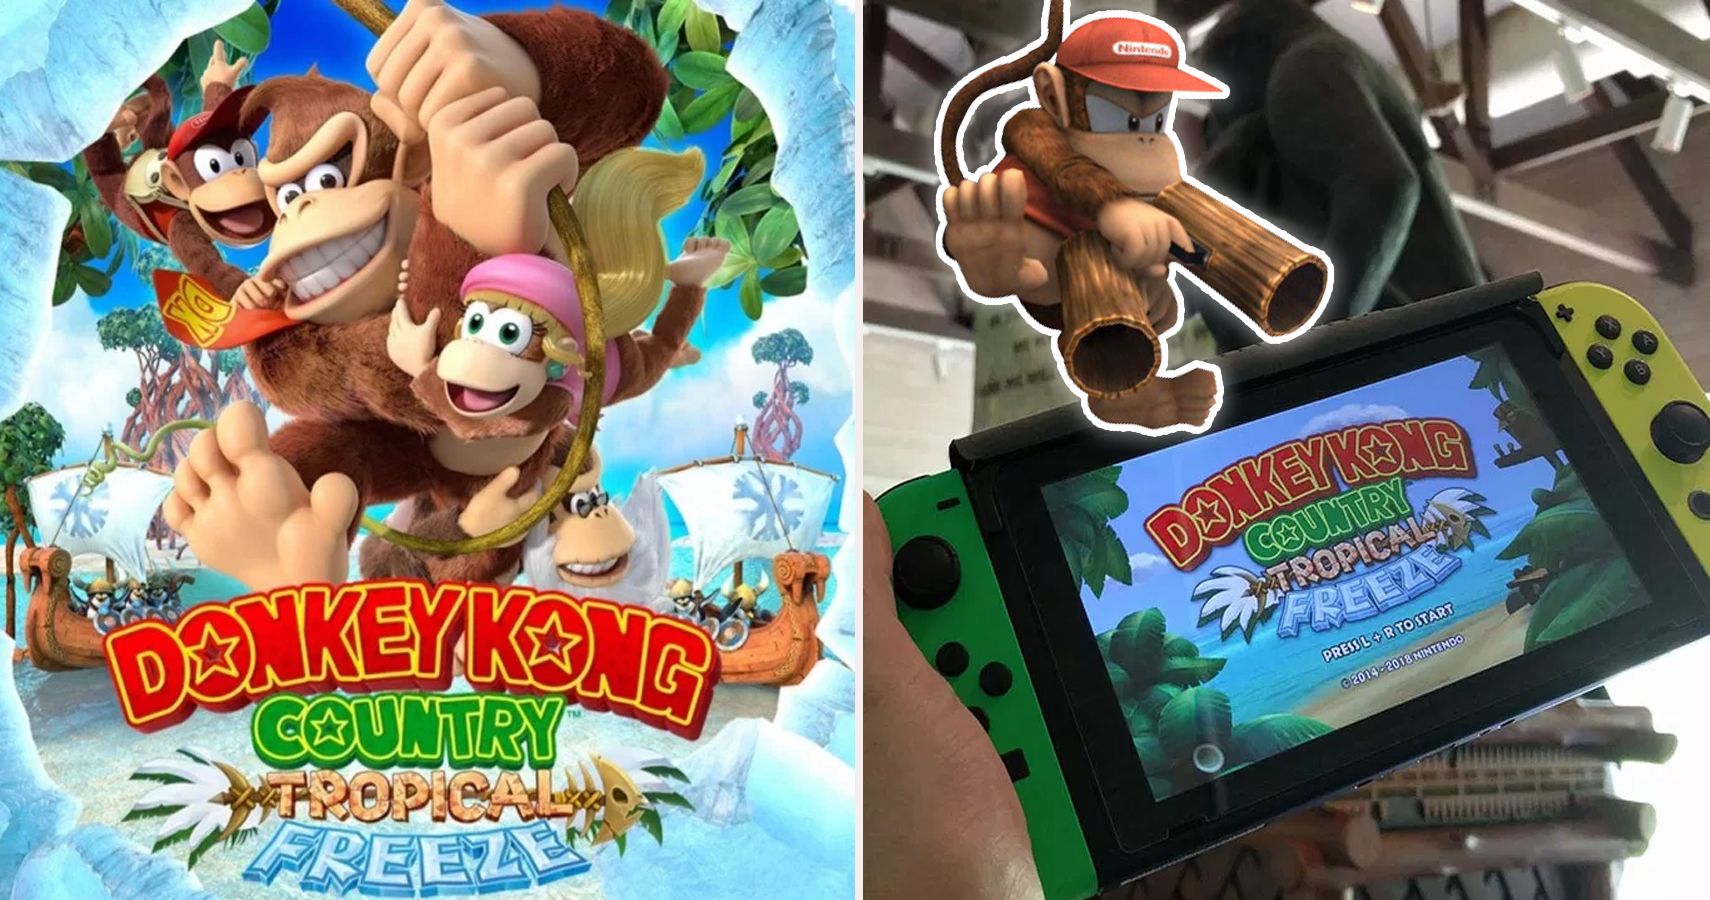 Worst Things About Donkey Kong: Tropical For Nintendo Switch